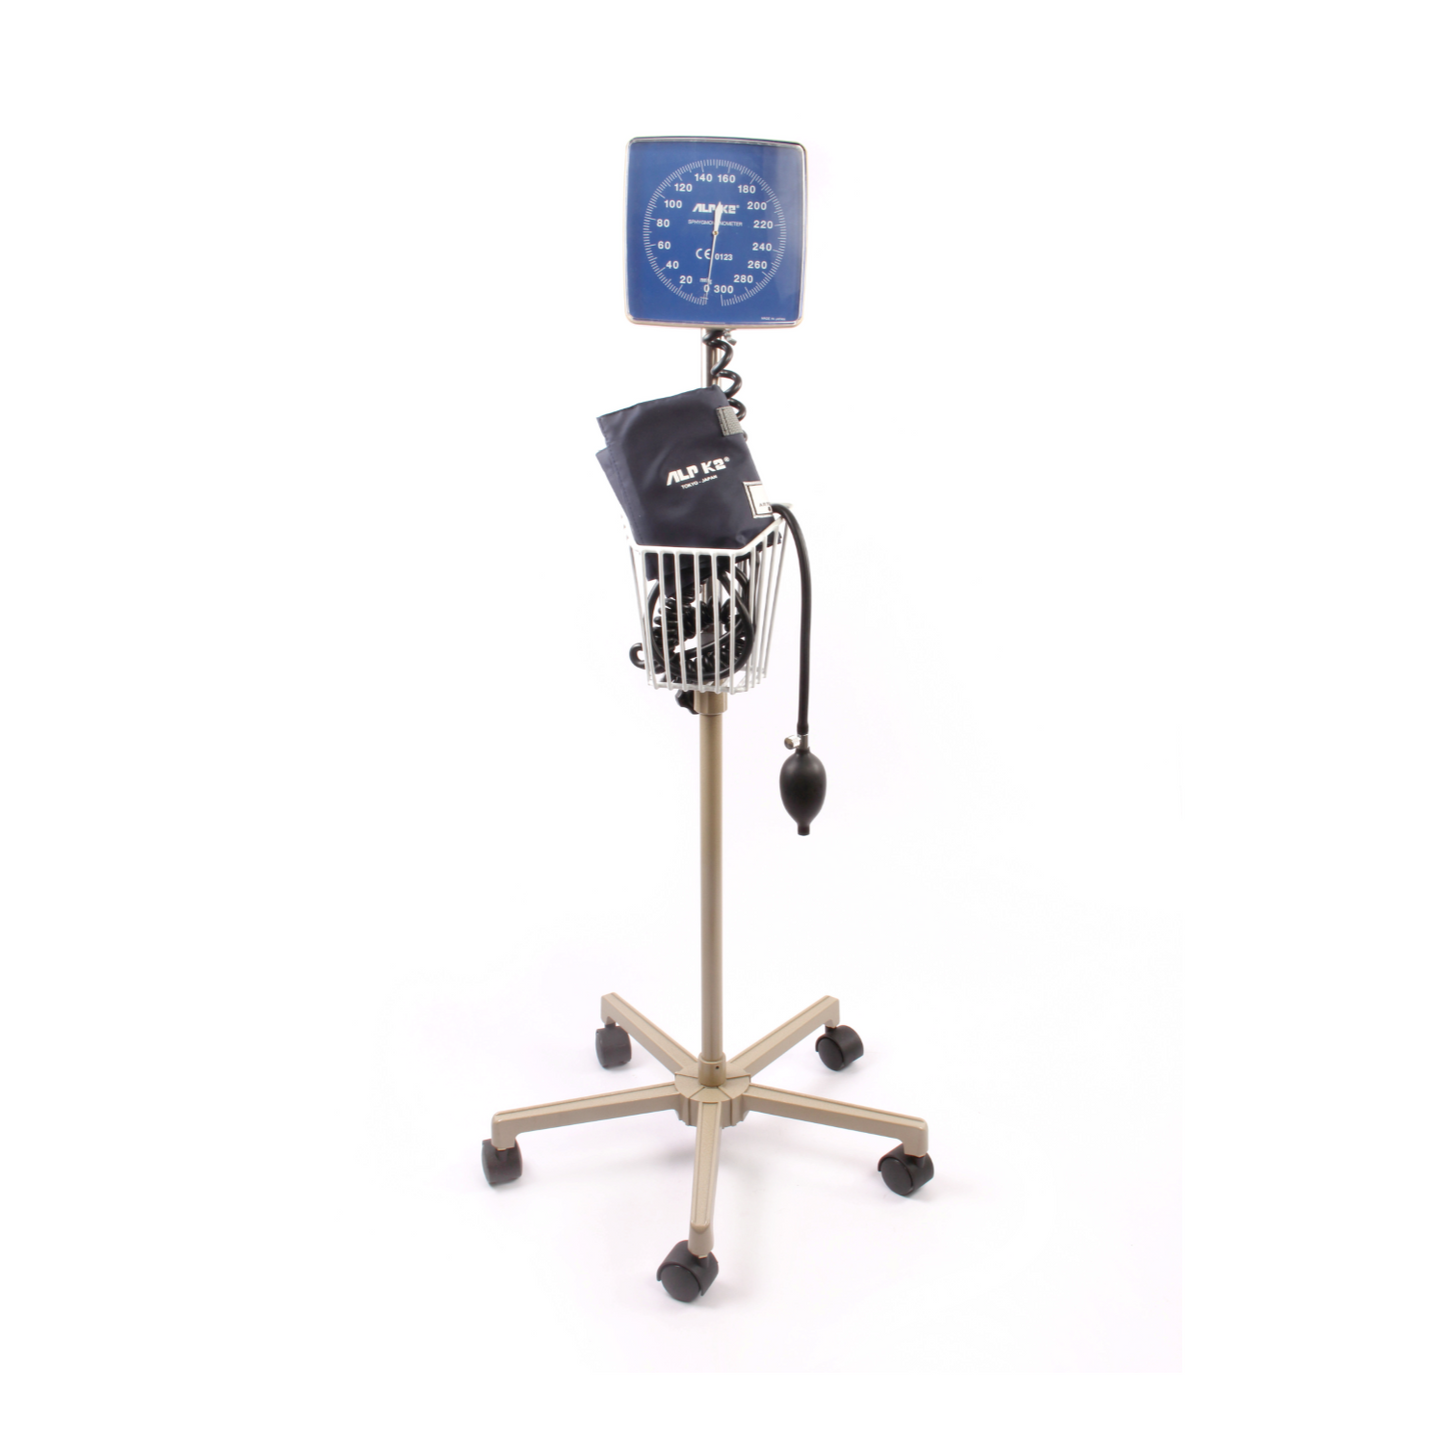 ALP K2 Standby Aneroid Sphygmomanometer - Blood pressure monitoring for medical standby.